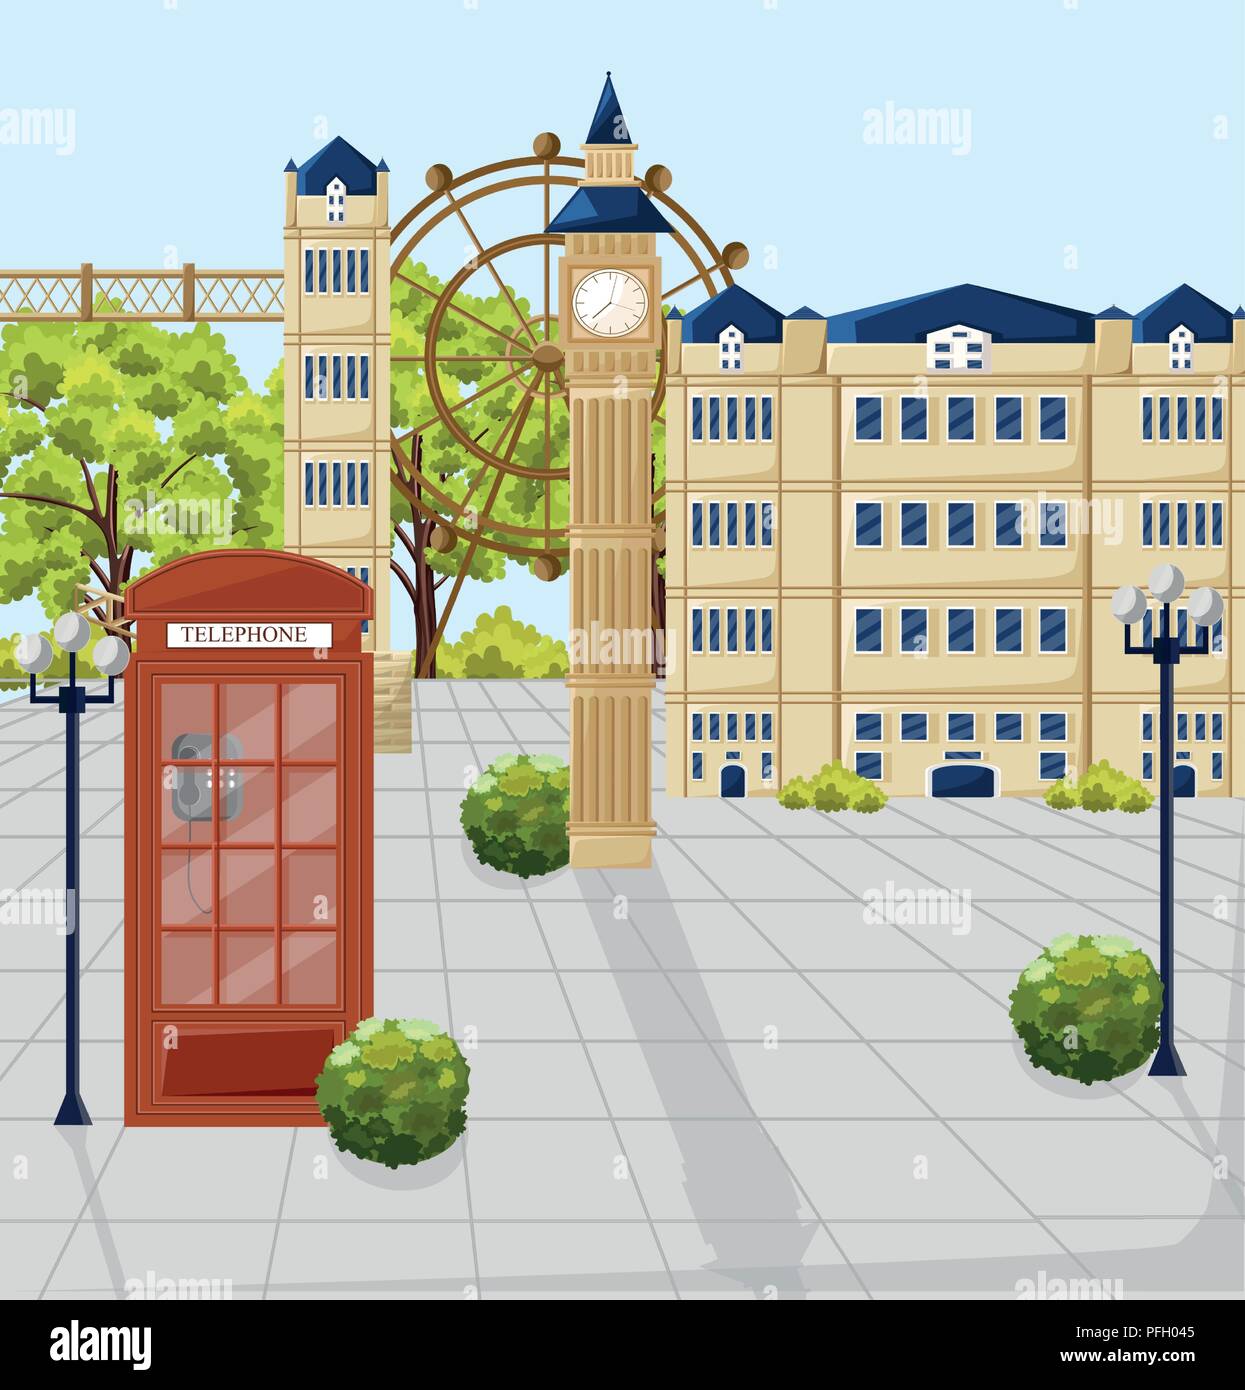 Red Phone booth in London Vector. Architecture facades on background. City attractions, street view Stock Vector